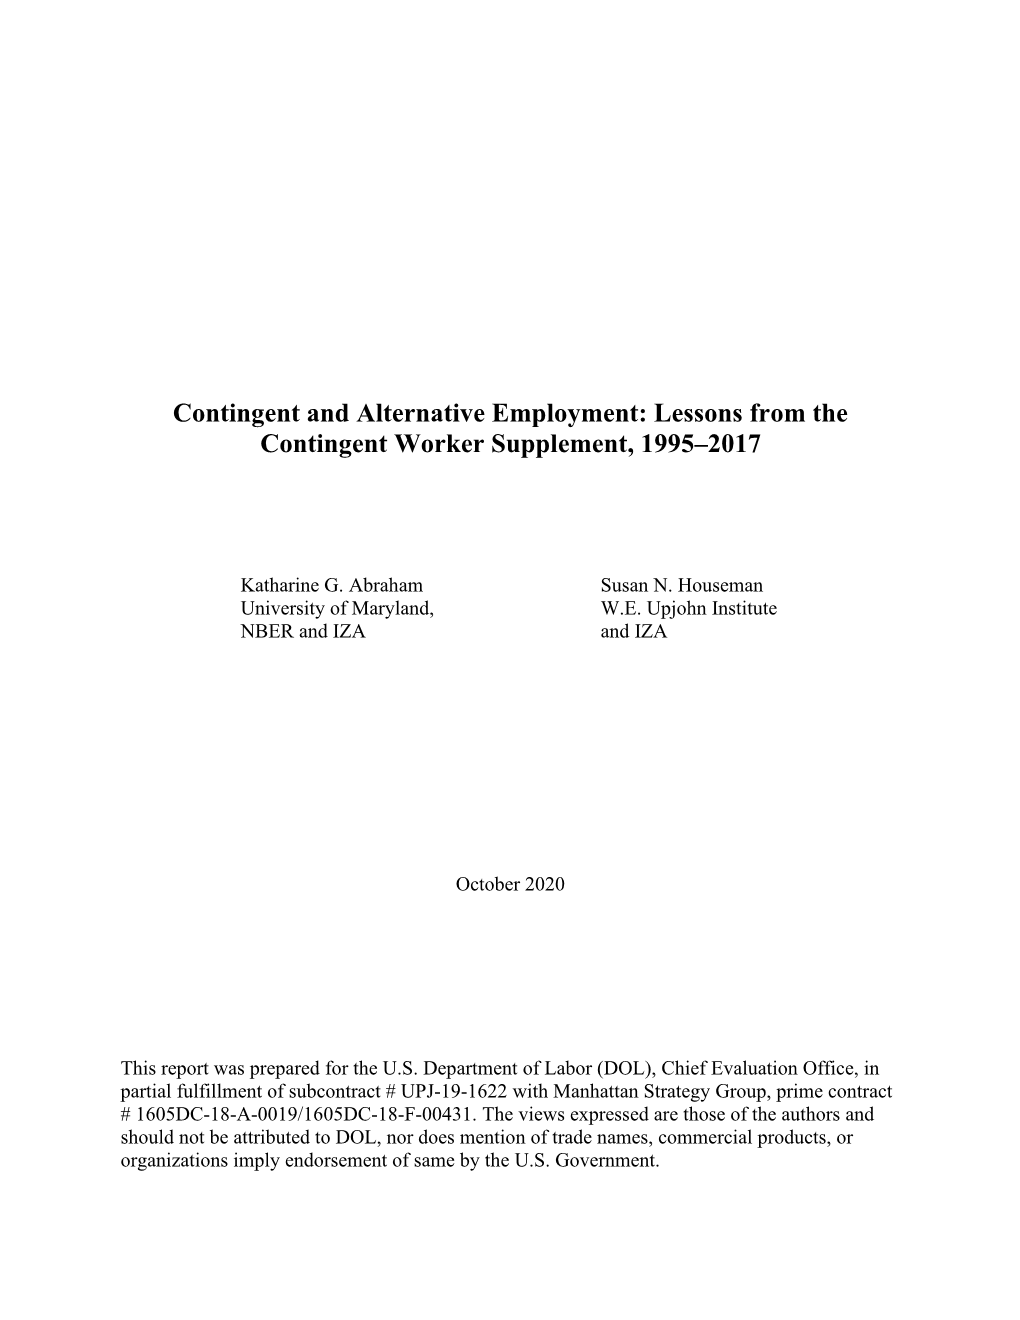 Contingent and Alternative Employment: Lessons from the Contingent Worker Supplement, 1995-2017